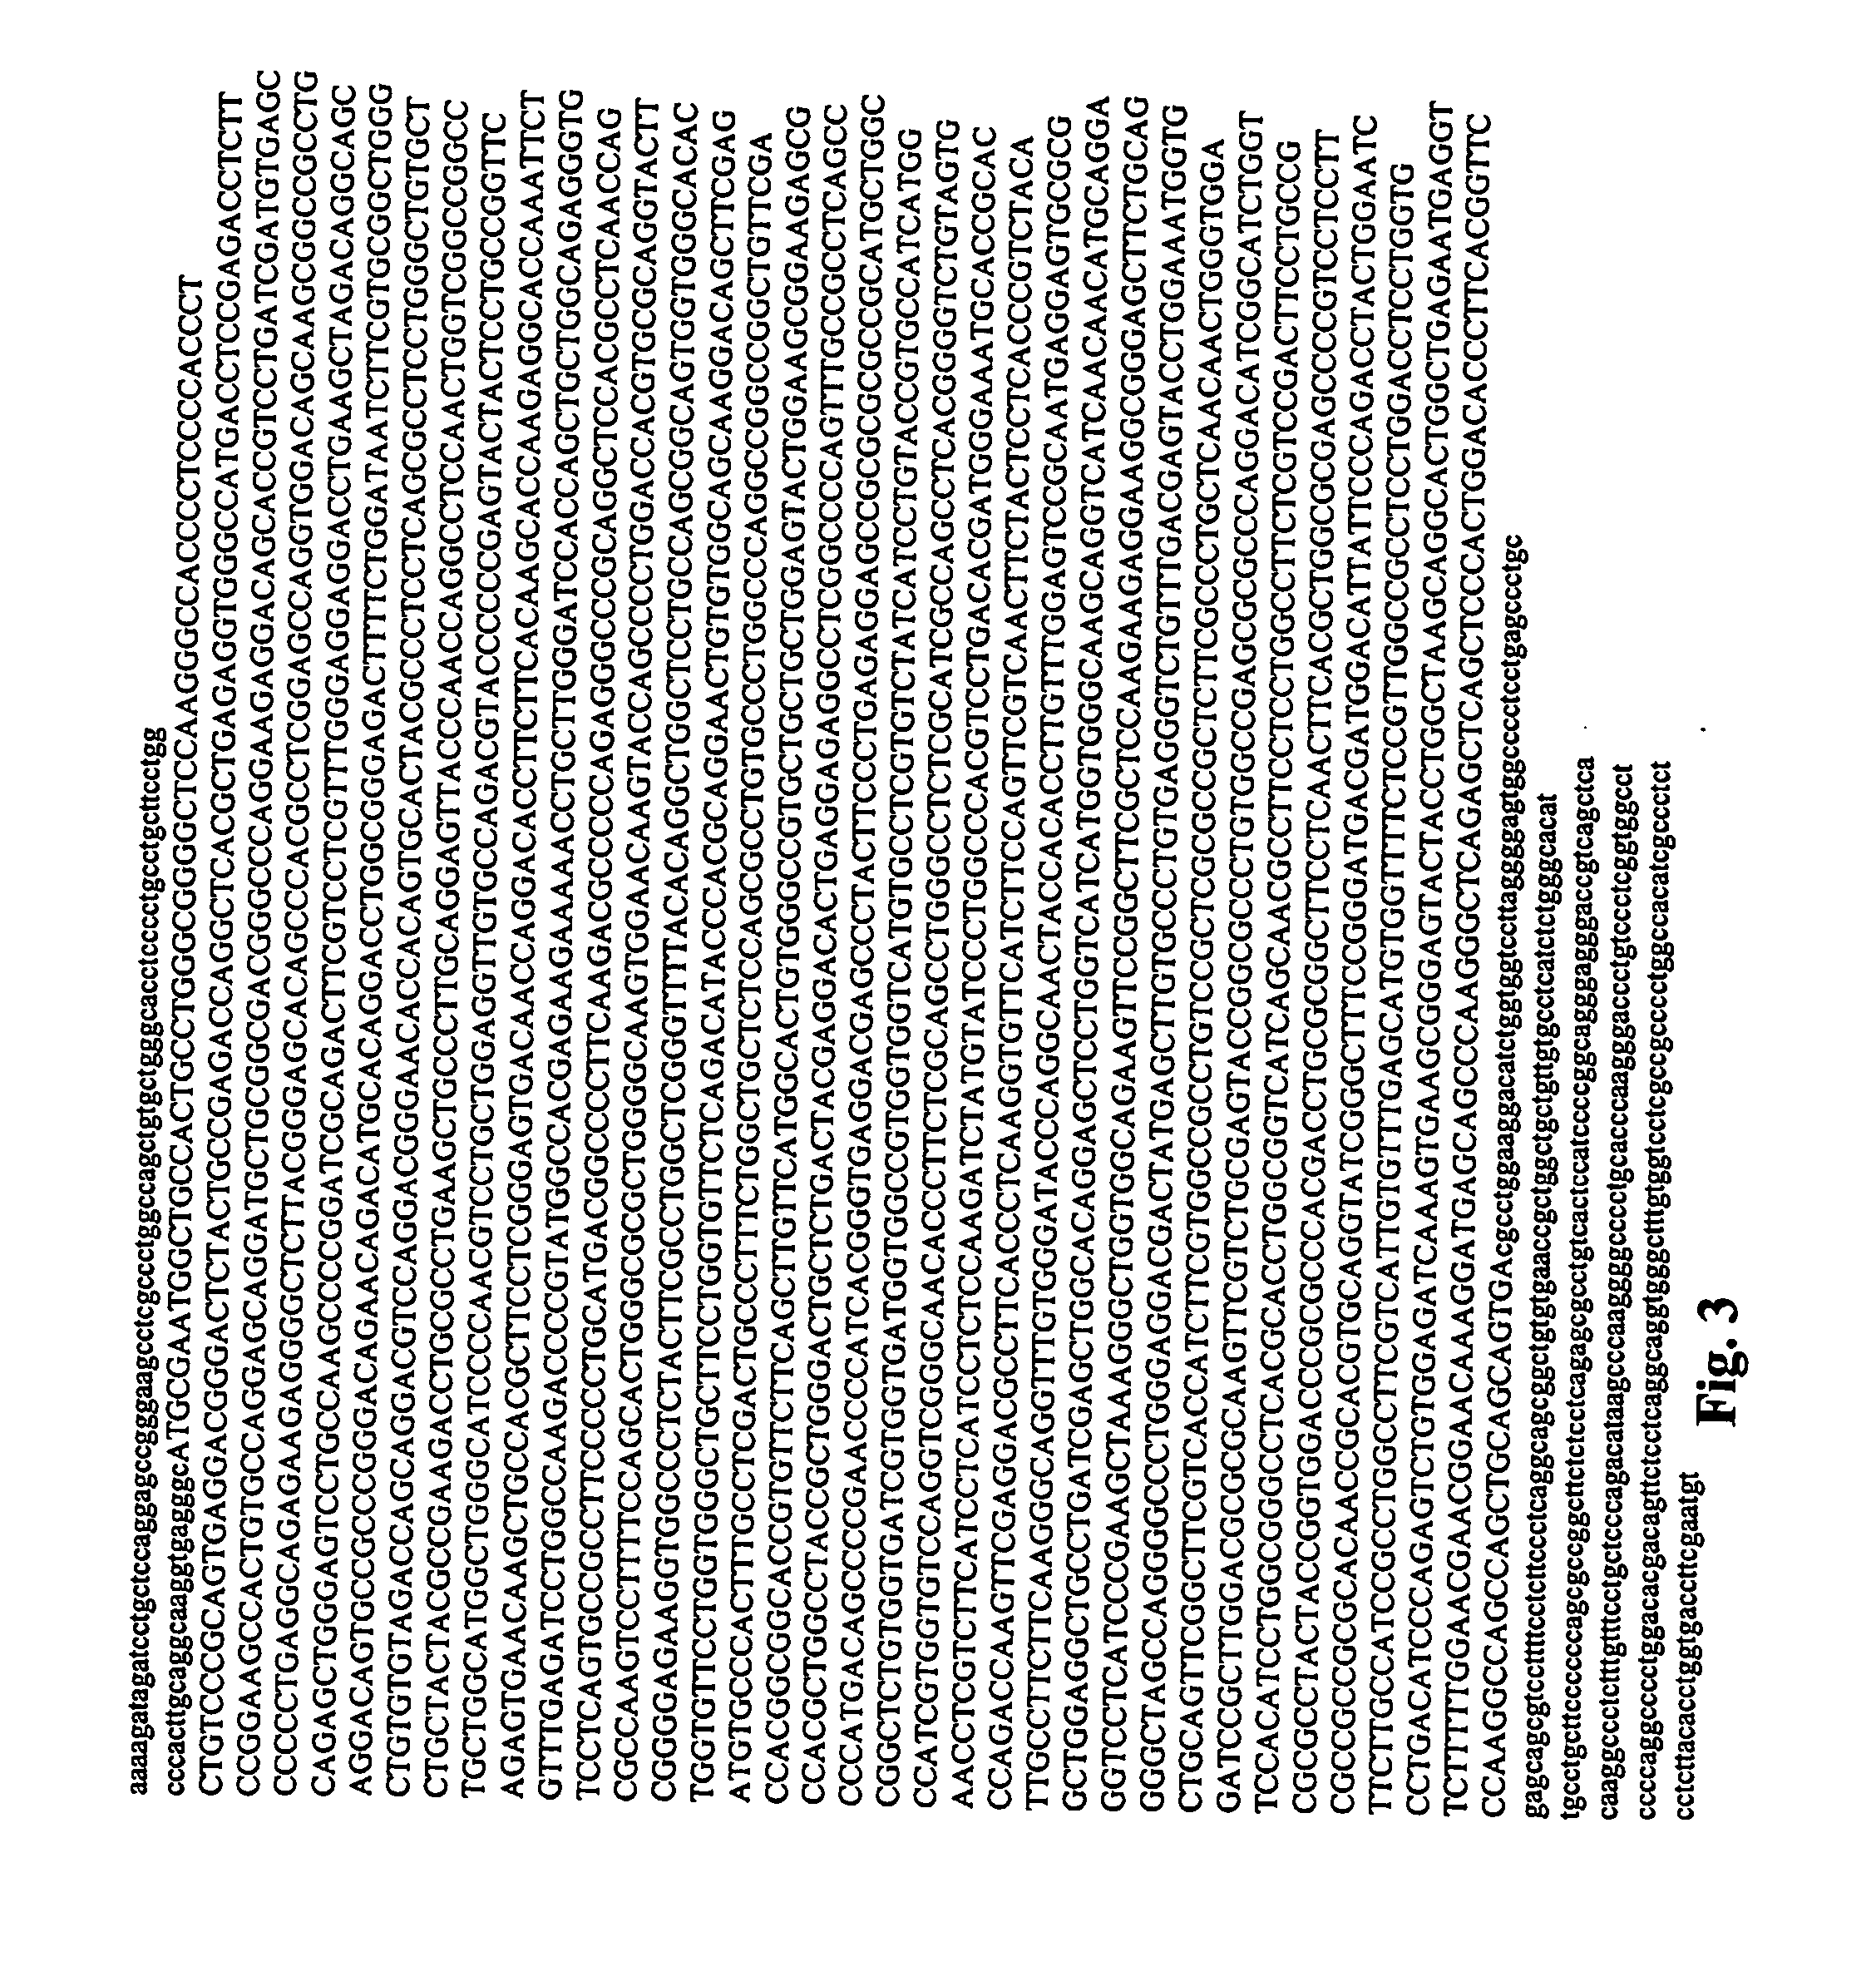 Gene expressed in prostate cancer, methods and use thereof